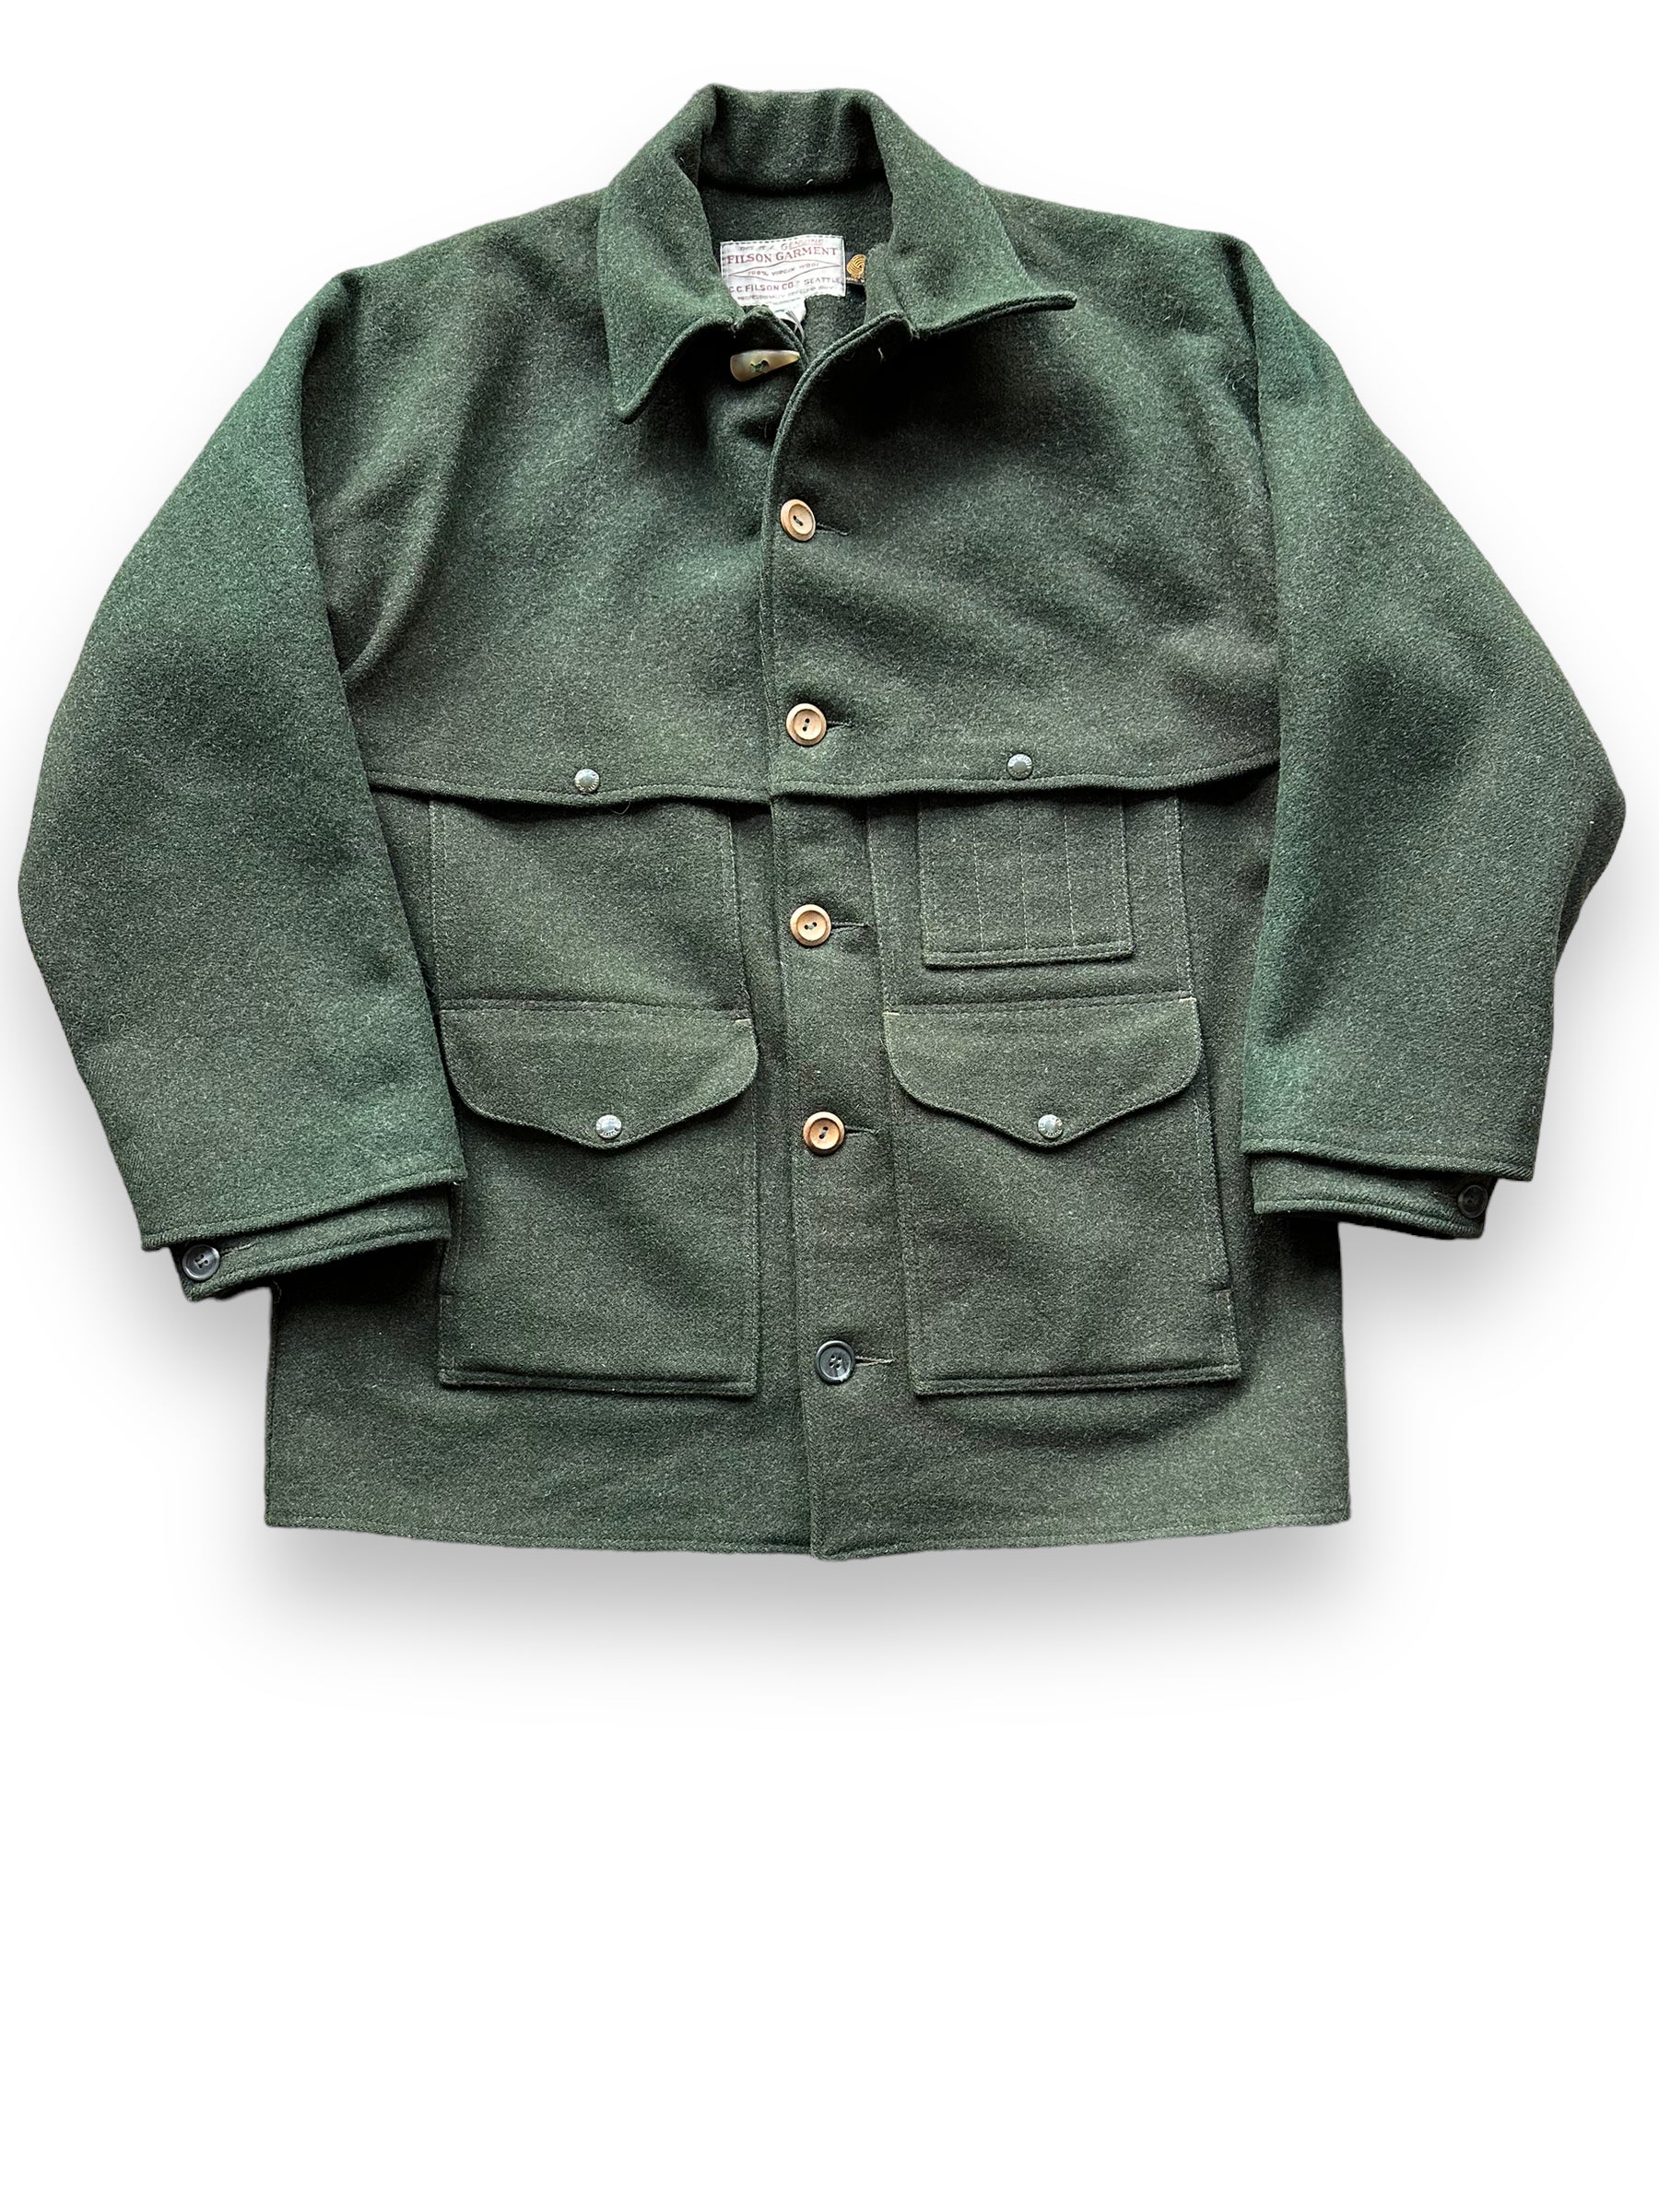 Front View of Vintage Filson Forest Green Double Mackinaw Cruiser SZ 46 XL |  Barn Owl Vintage Goods | Vintage Workwear Seattle